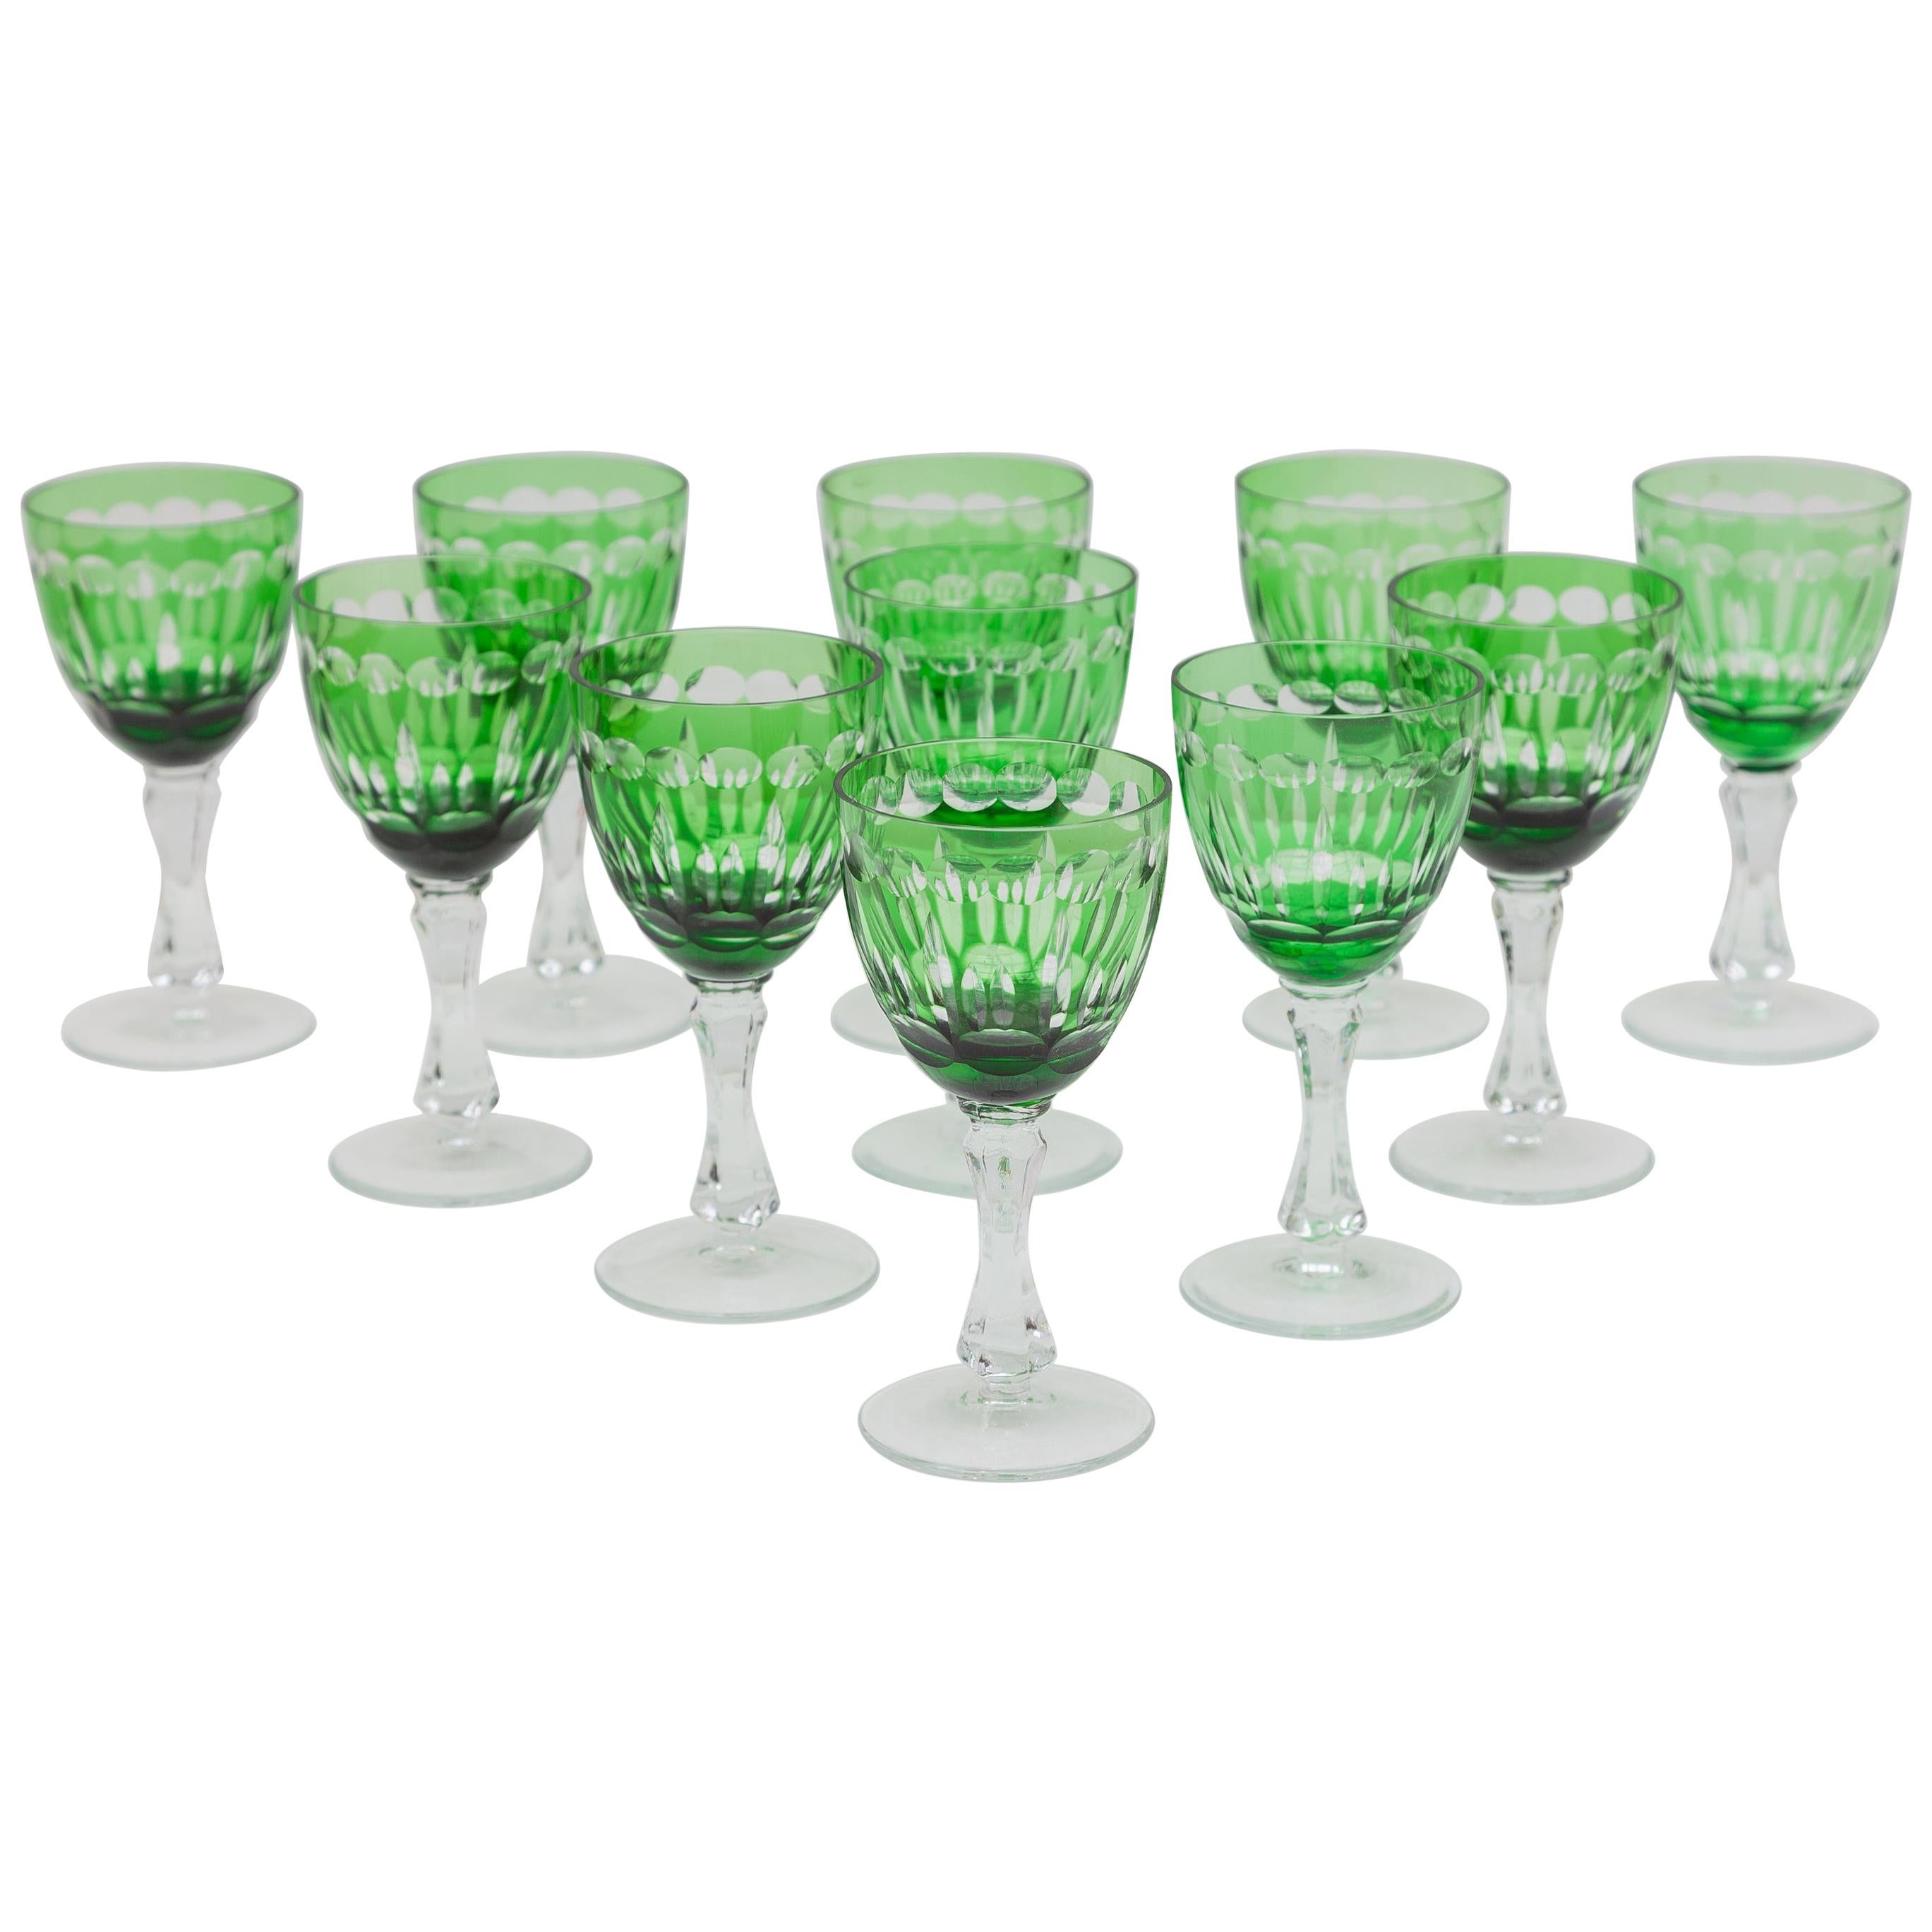 Art of Green Clear Faceted Crystal Wine Glasses designed, Val St Lamber, Belgium